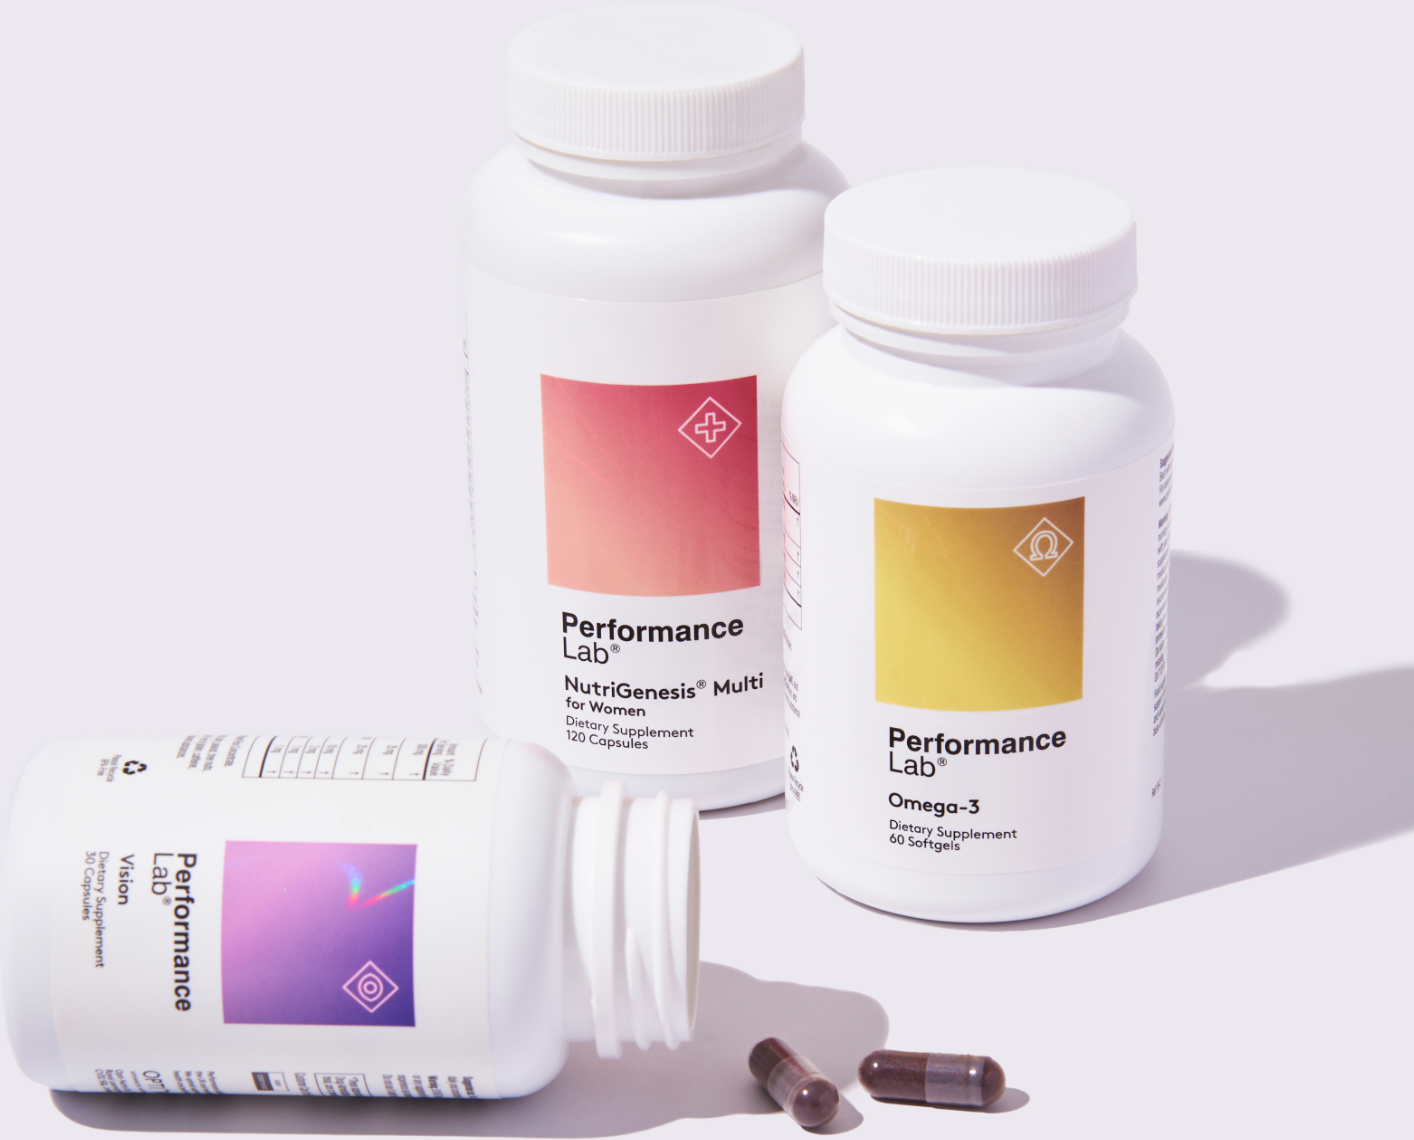 image of Performance Lab® products